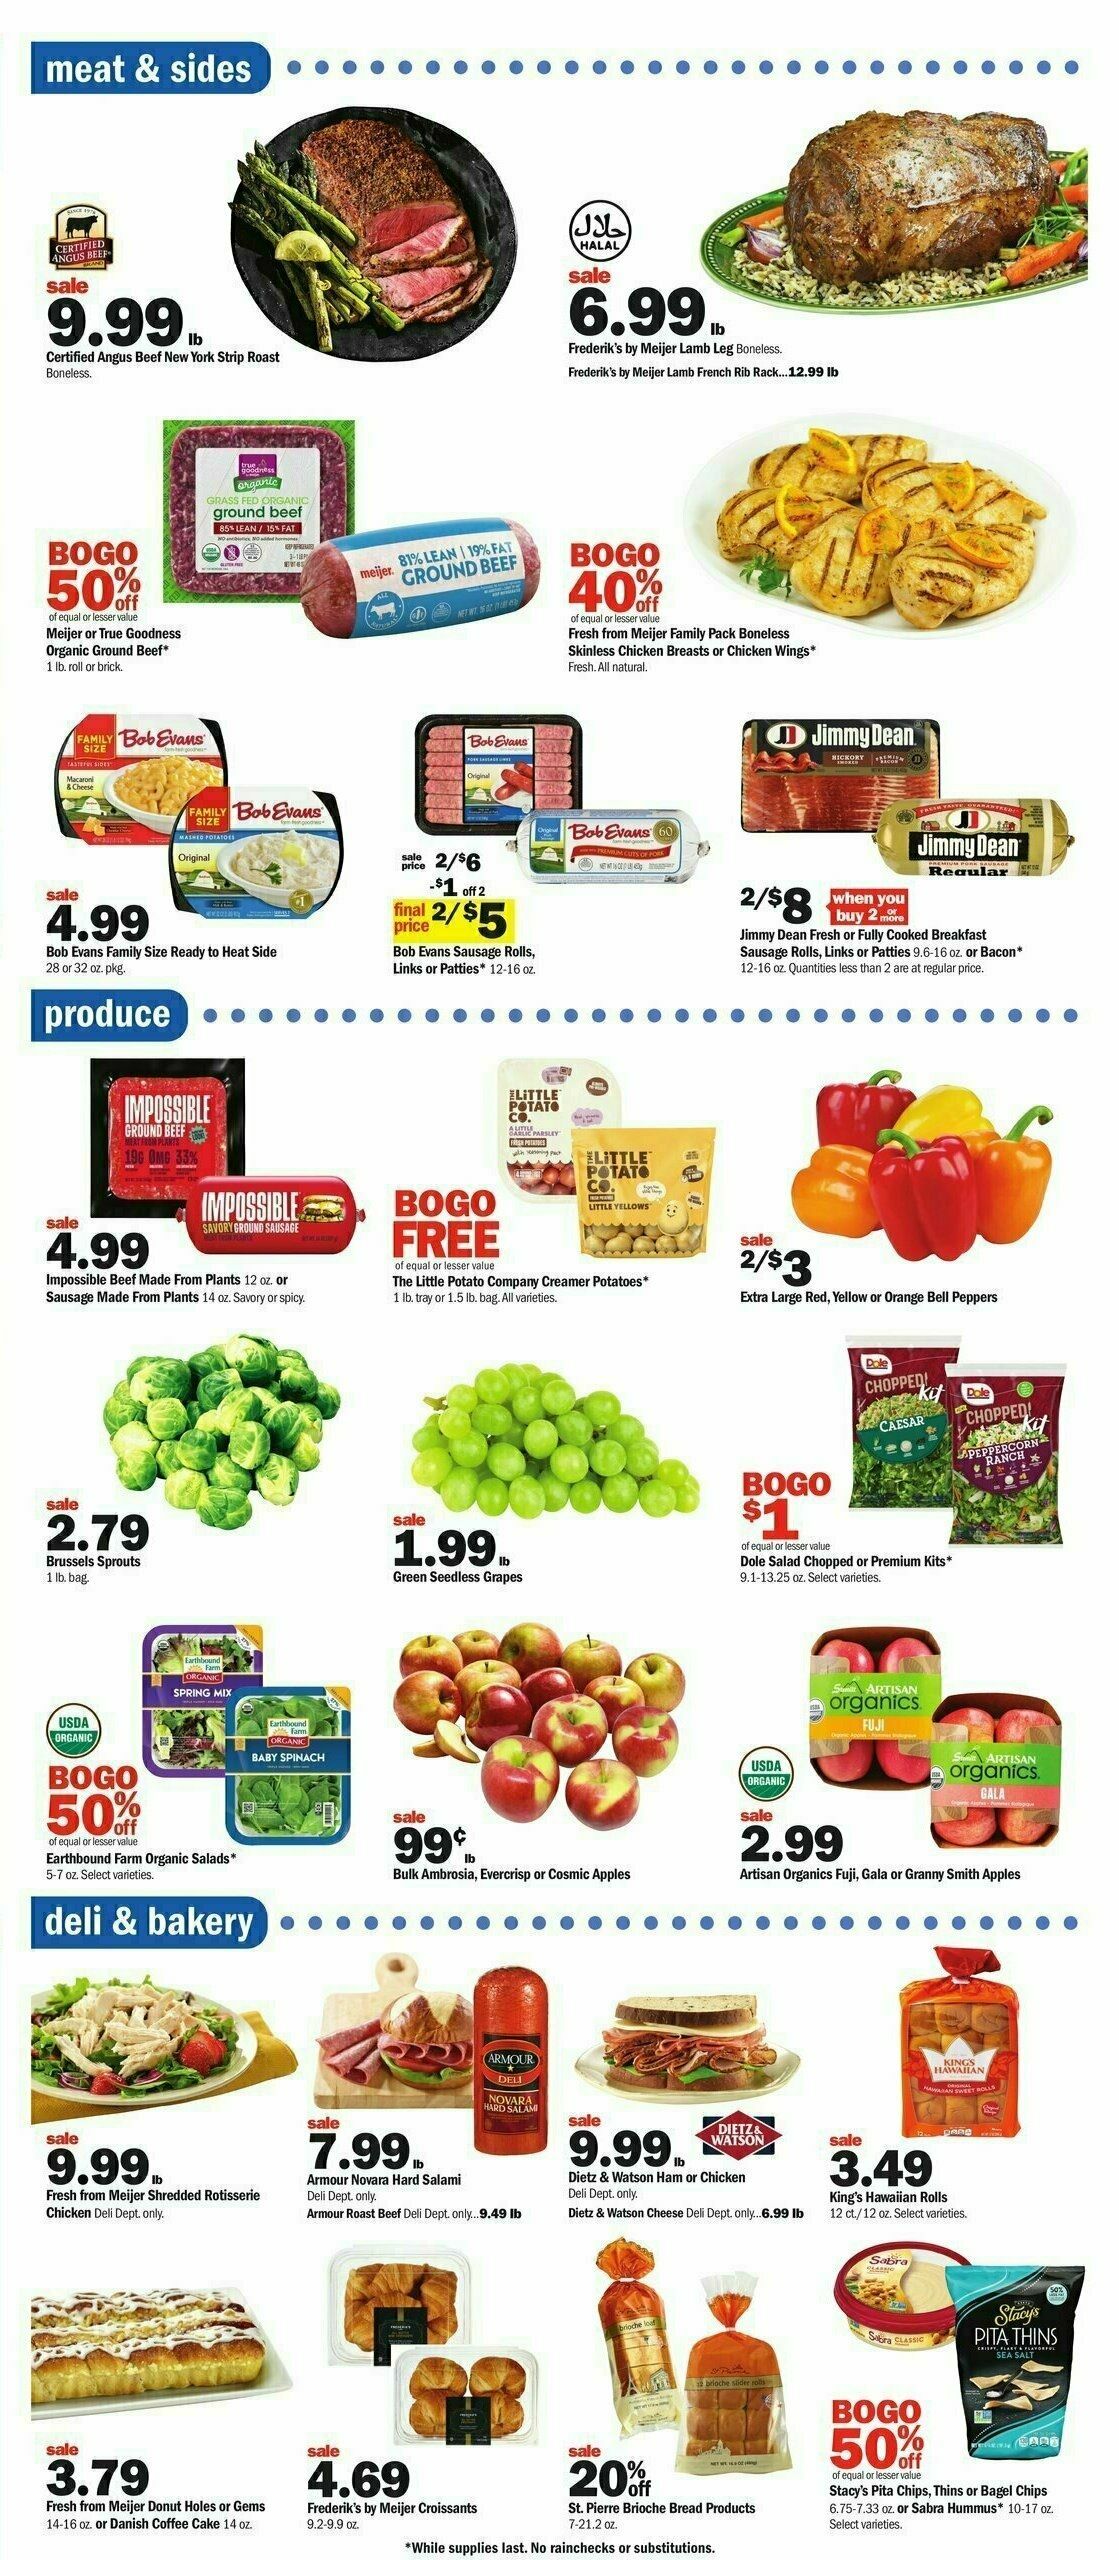 Meijer Weekly Ad from March 24